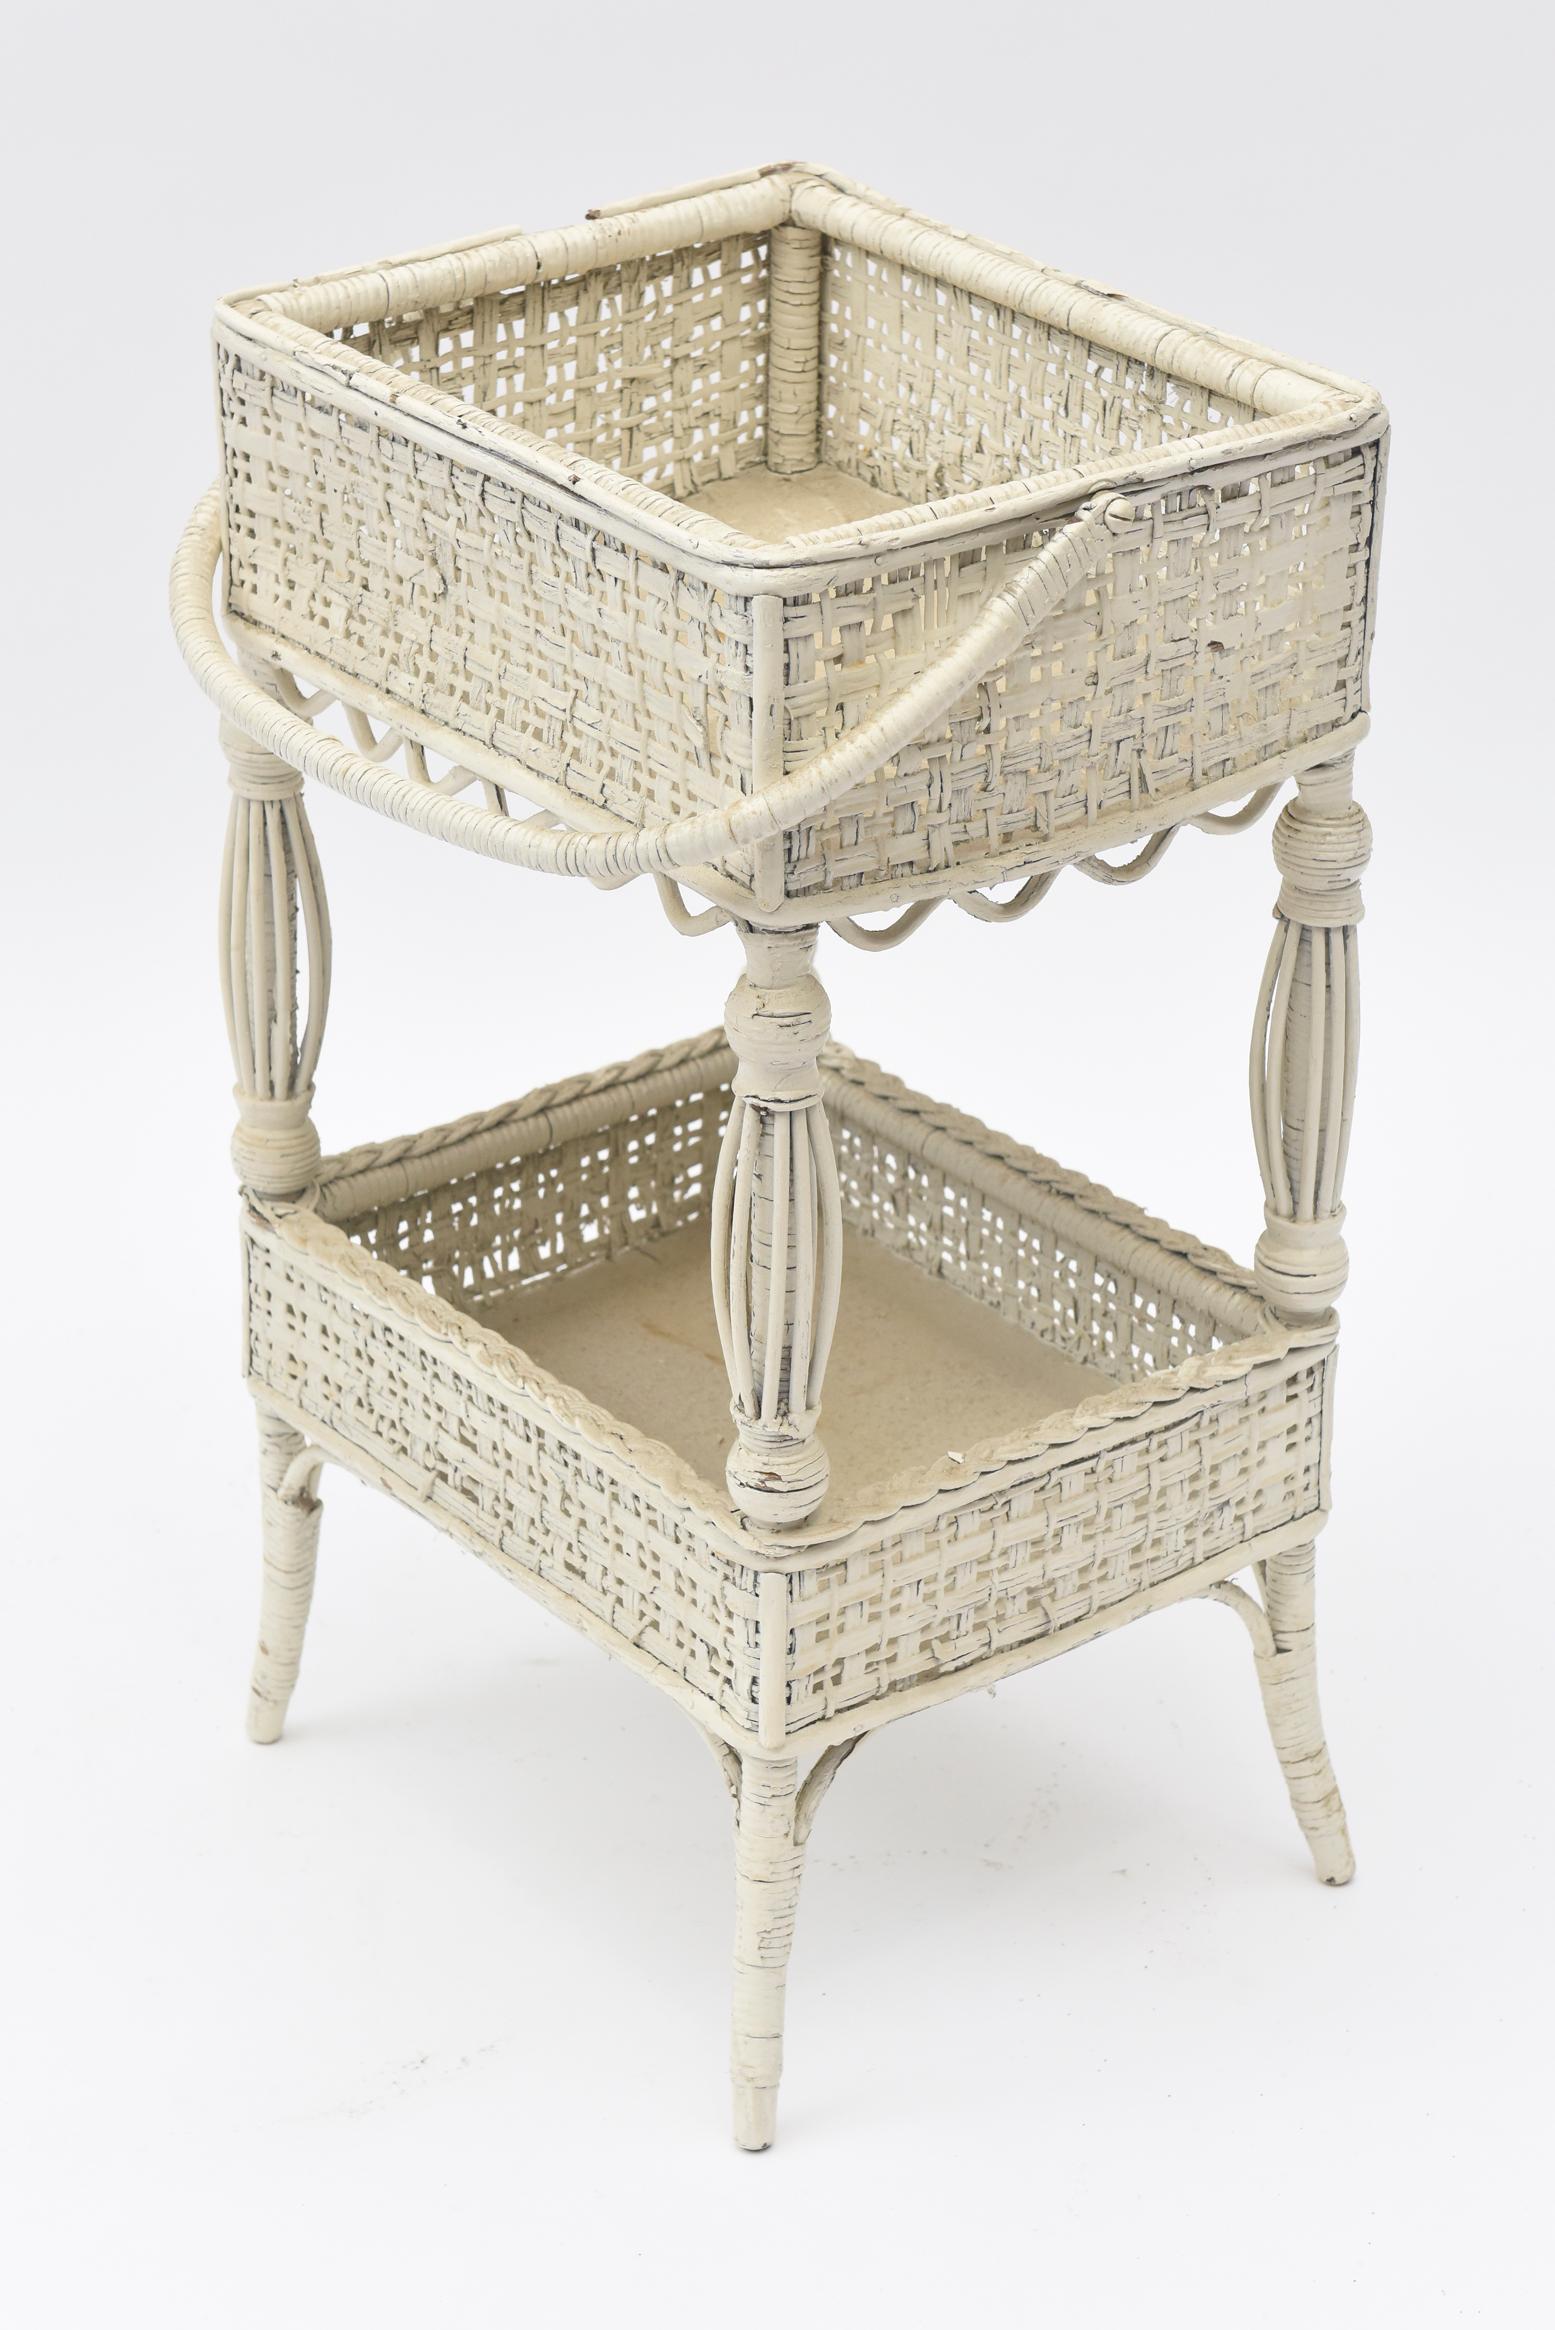 19th Century Victorian Wicker Open Sewing Stand with Work Basket below